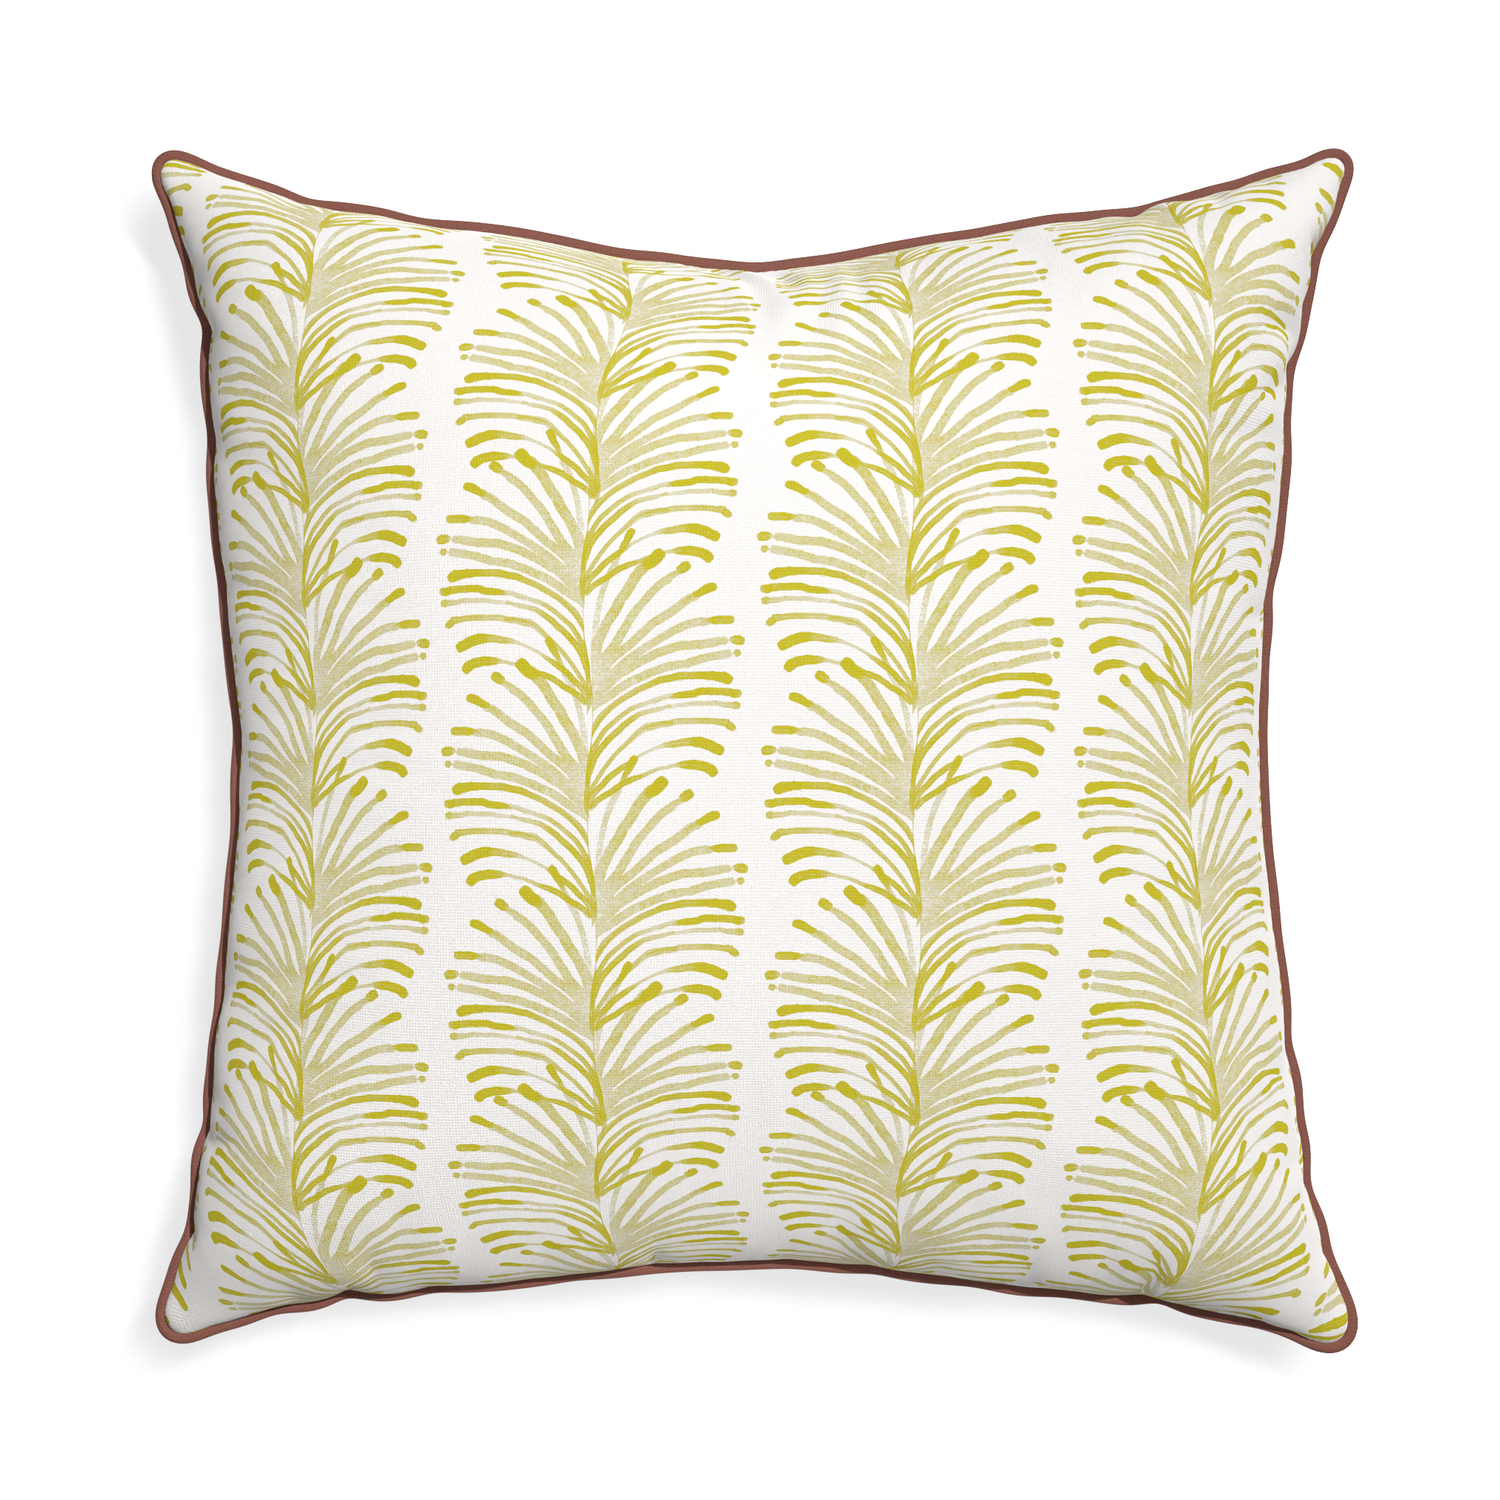 Euro-sham emma chartreuse custom yellow stripe chartreusepillow with w piping on white background